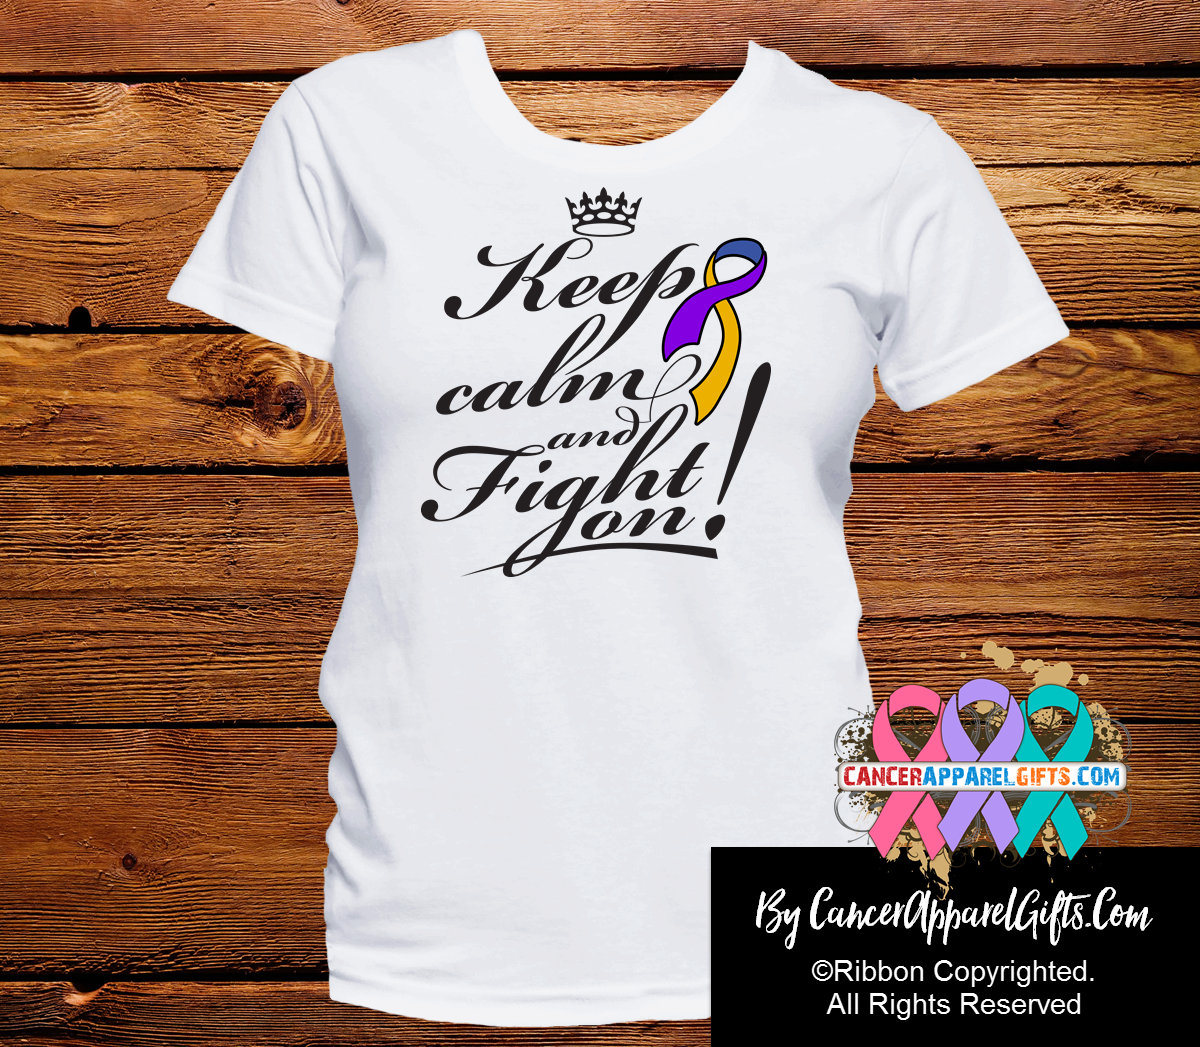 Bladder Cancer Keep Calm and Fight On Shirts - Cancer Apparel and Gifts